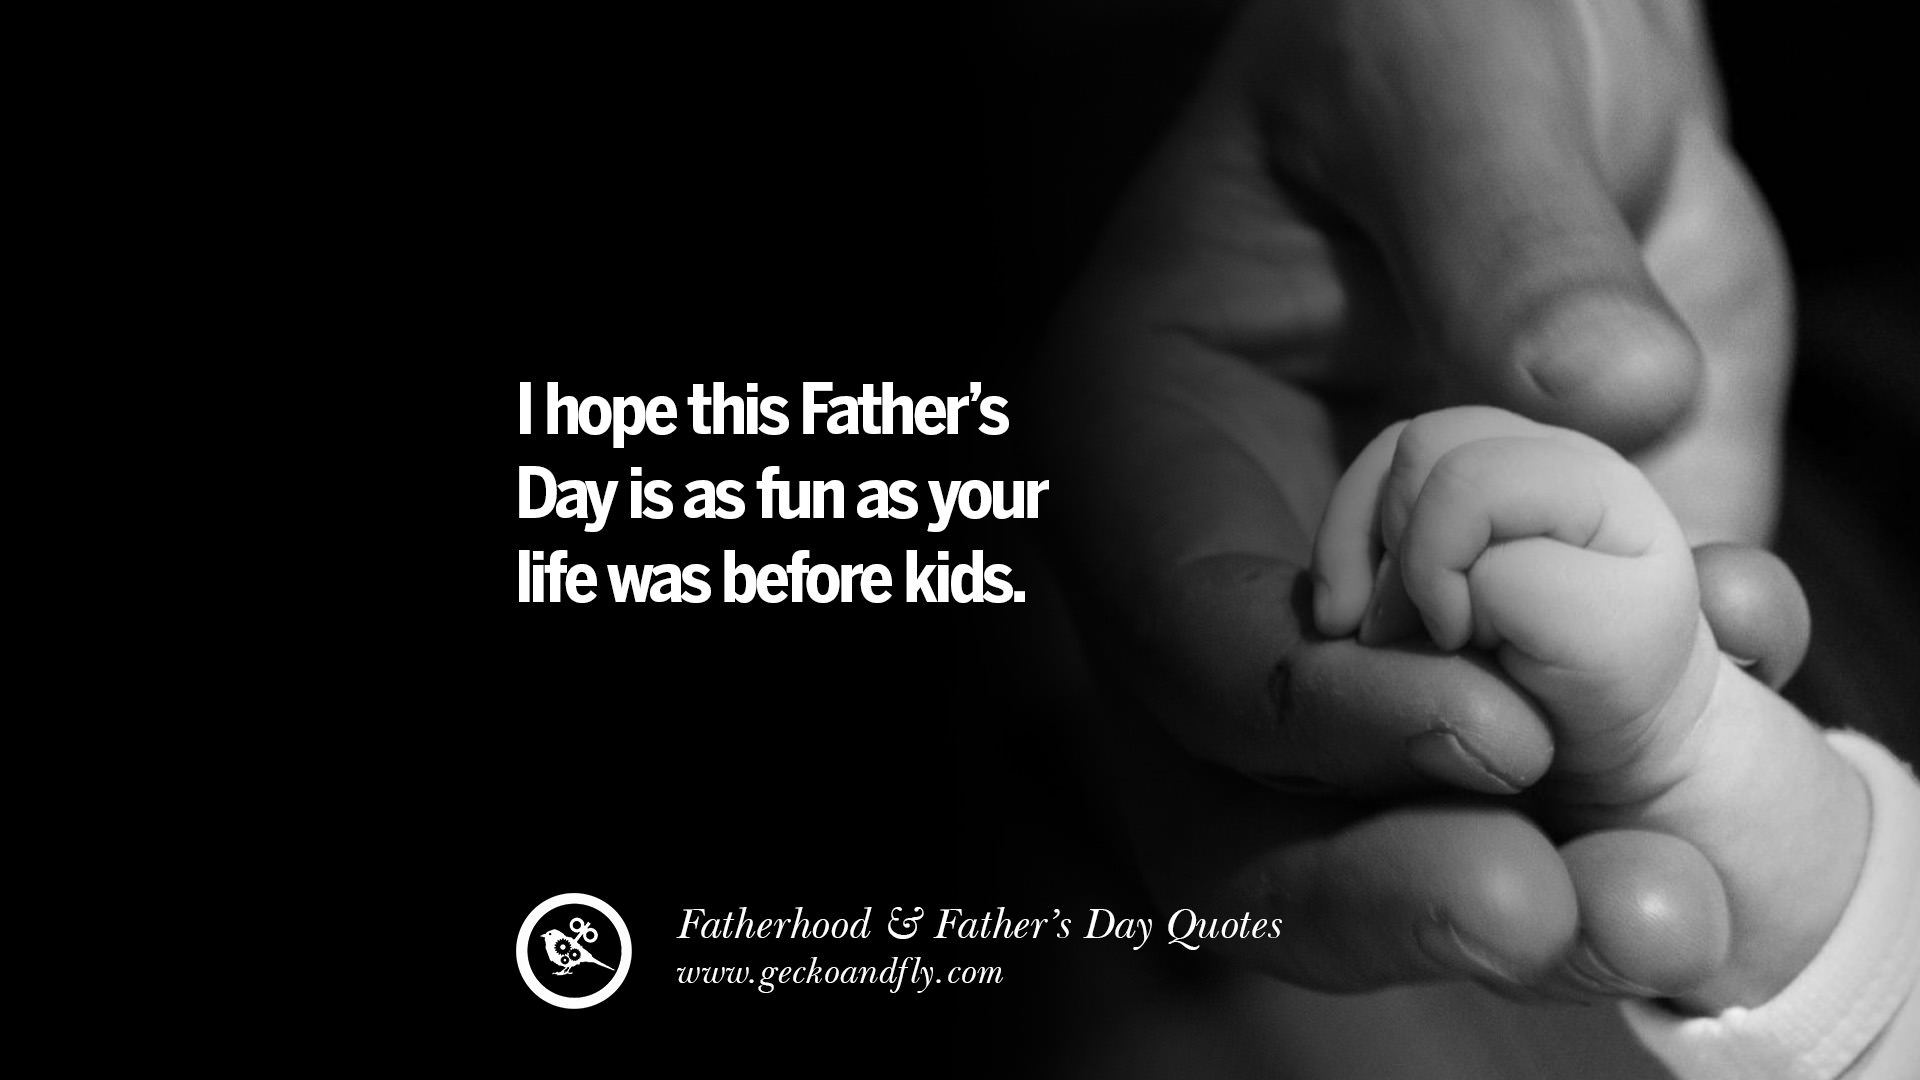 50 Inspiring And Funny Father's Day Quotes On Fatherhood